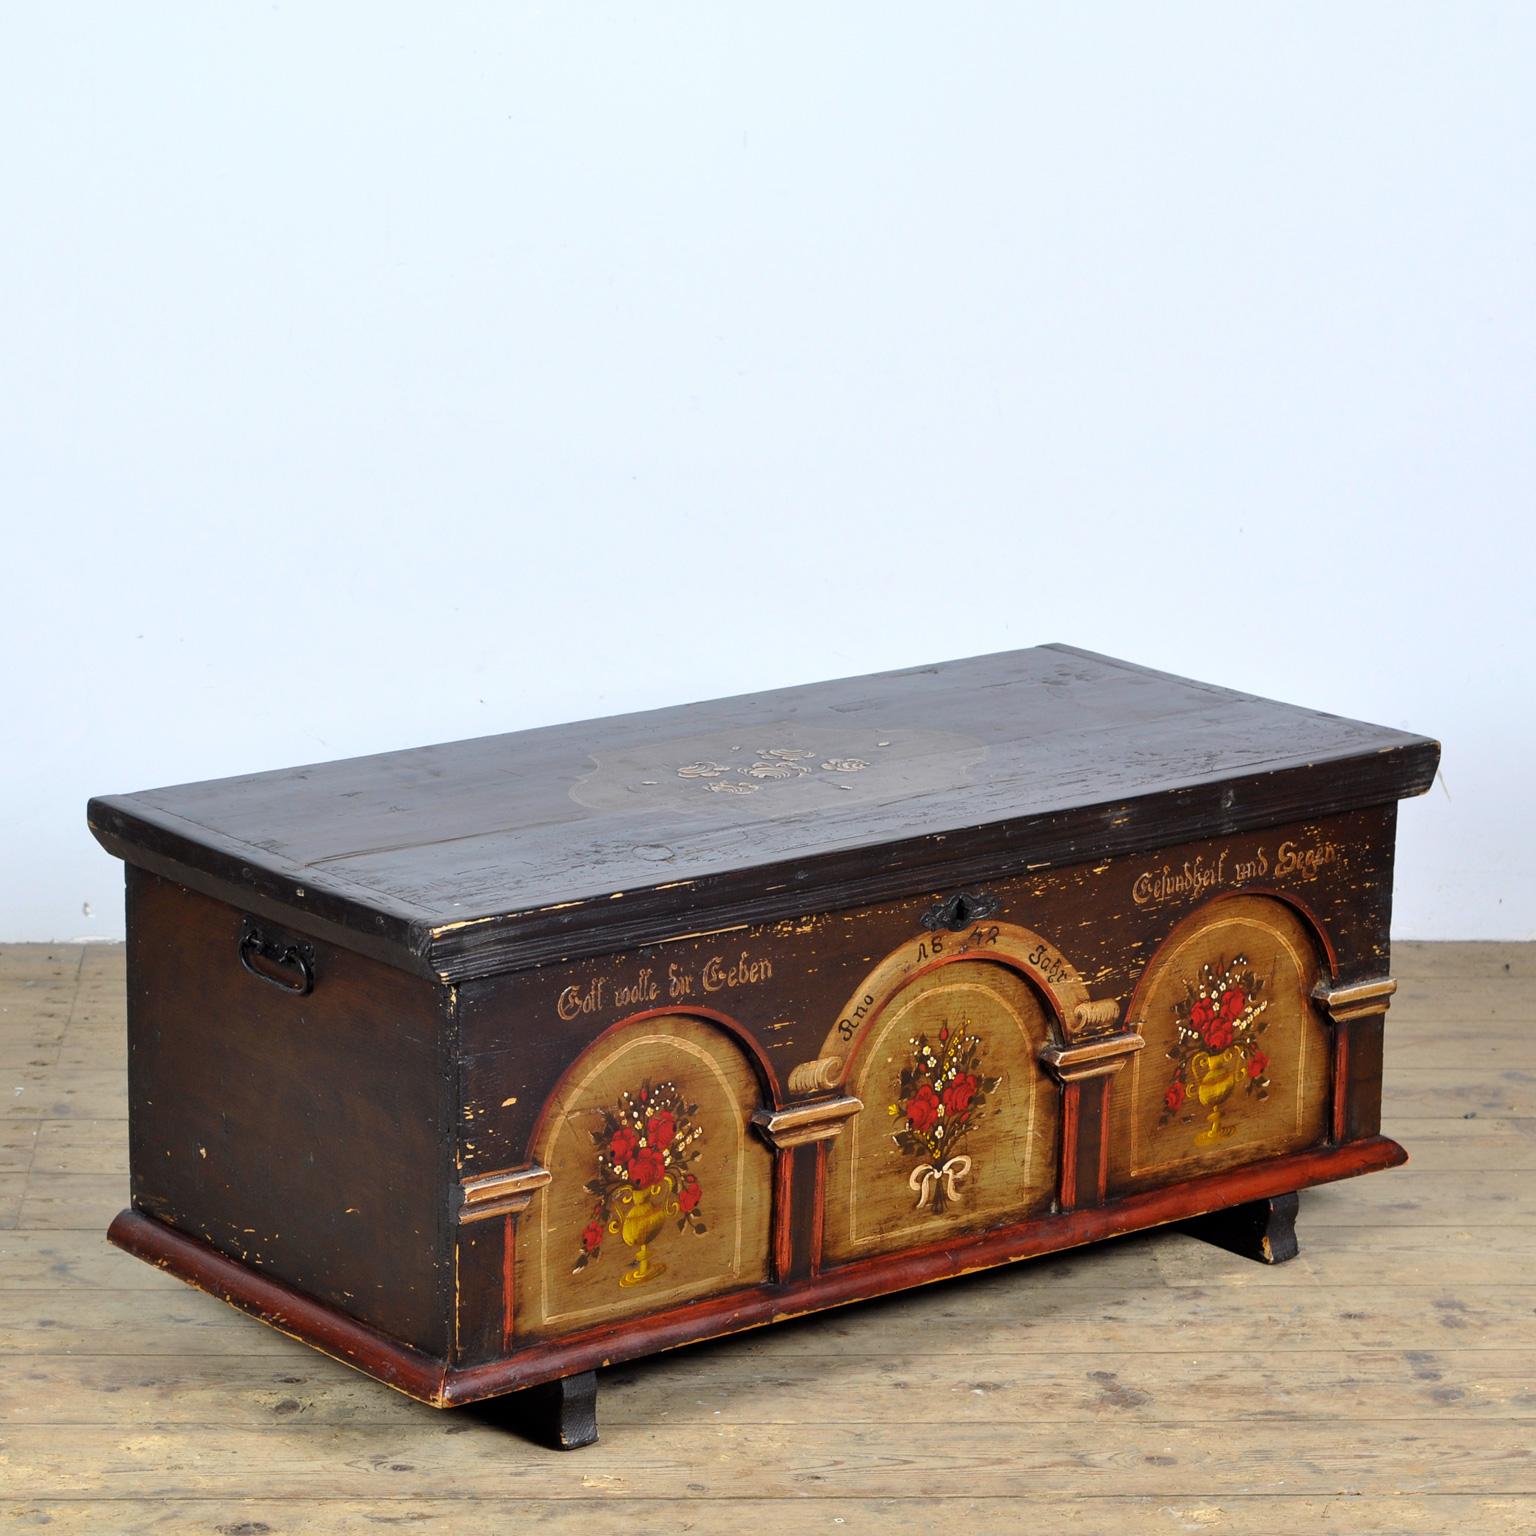 Picturesque German dowry chest made in 1842. These chests were typically part of a young woman's dowry, filled with her linen and silver to move to her new home after marriage. Hand painted with lovely fine details. With the original lock and key.